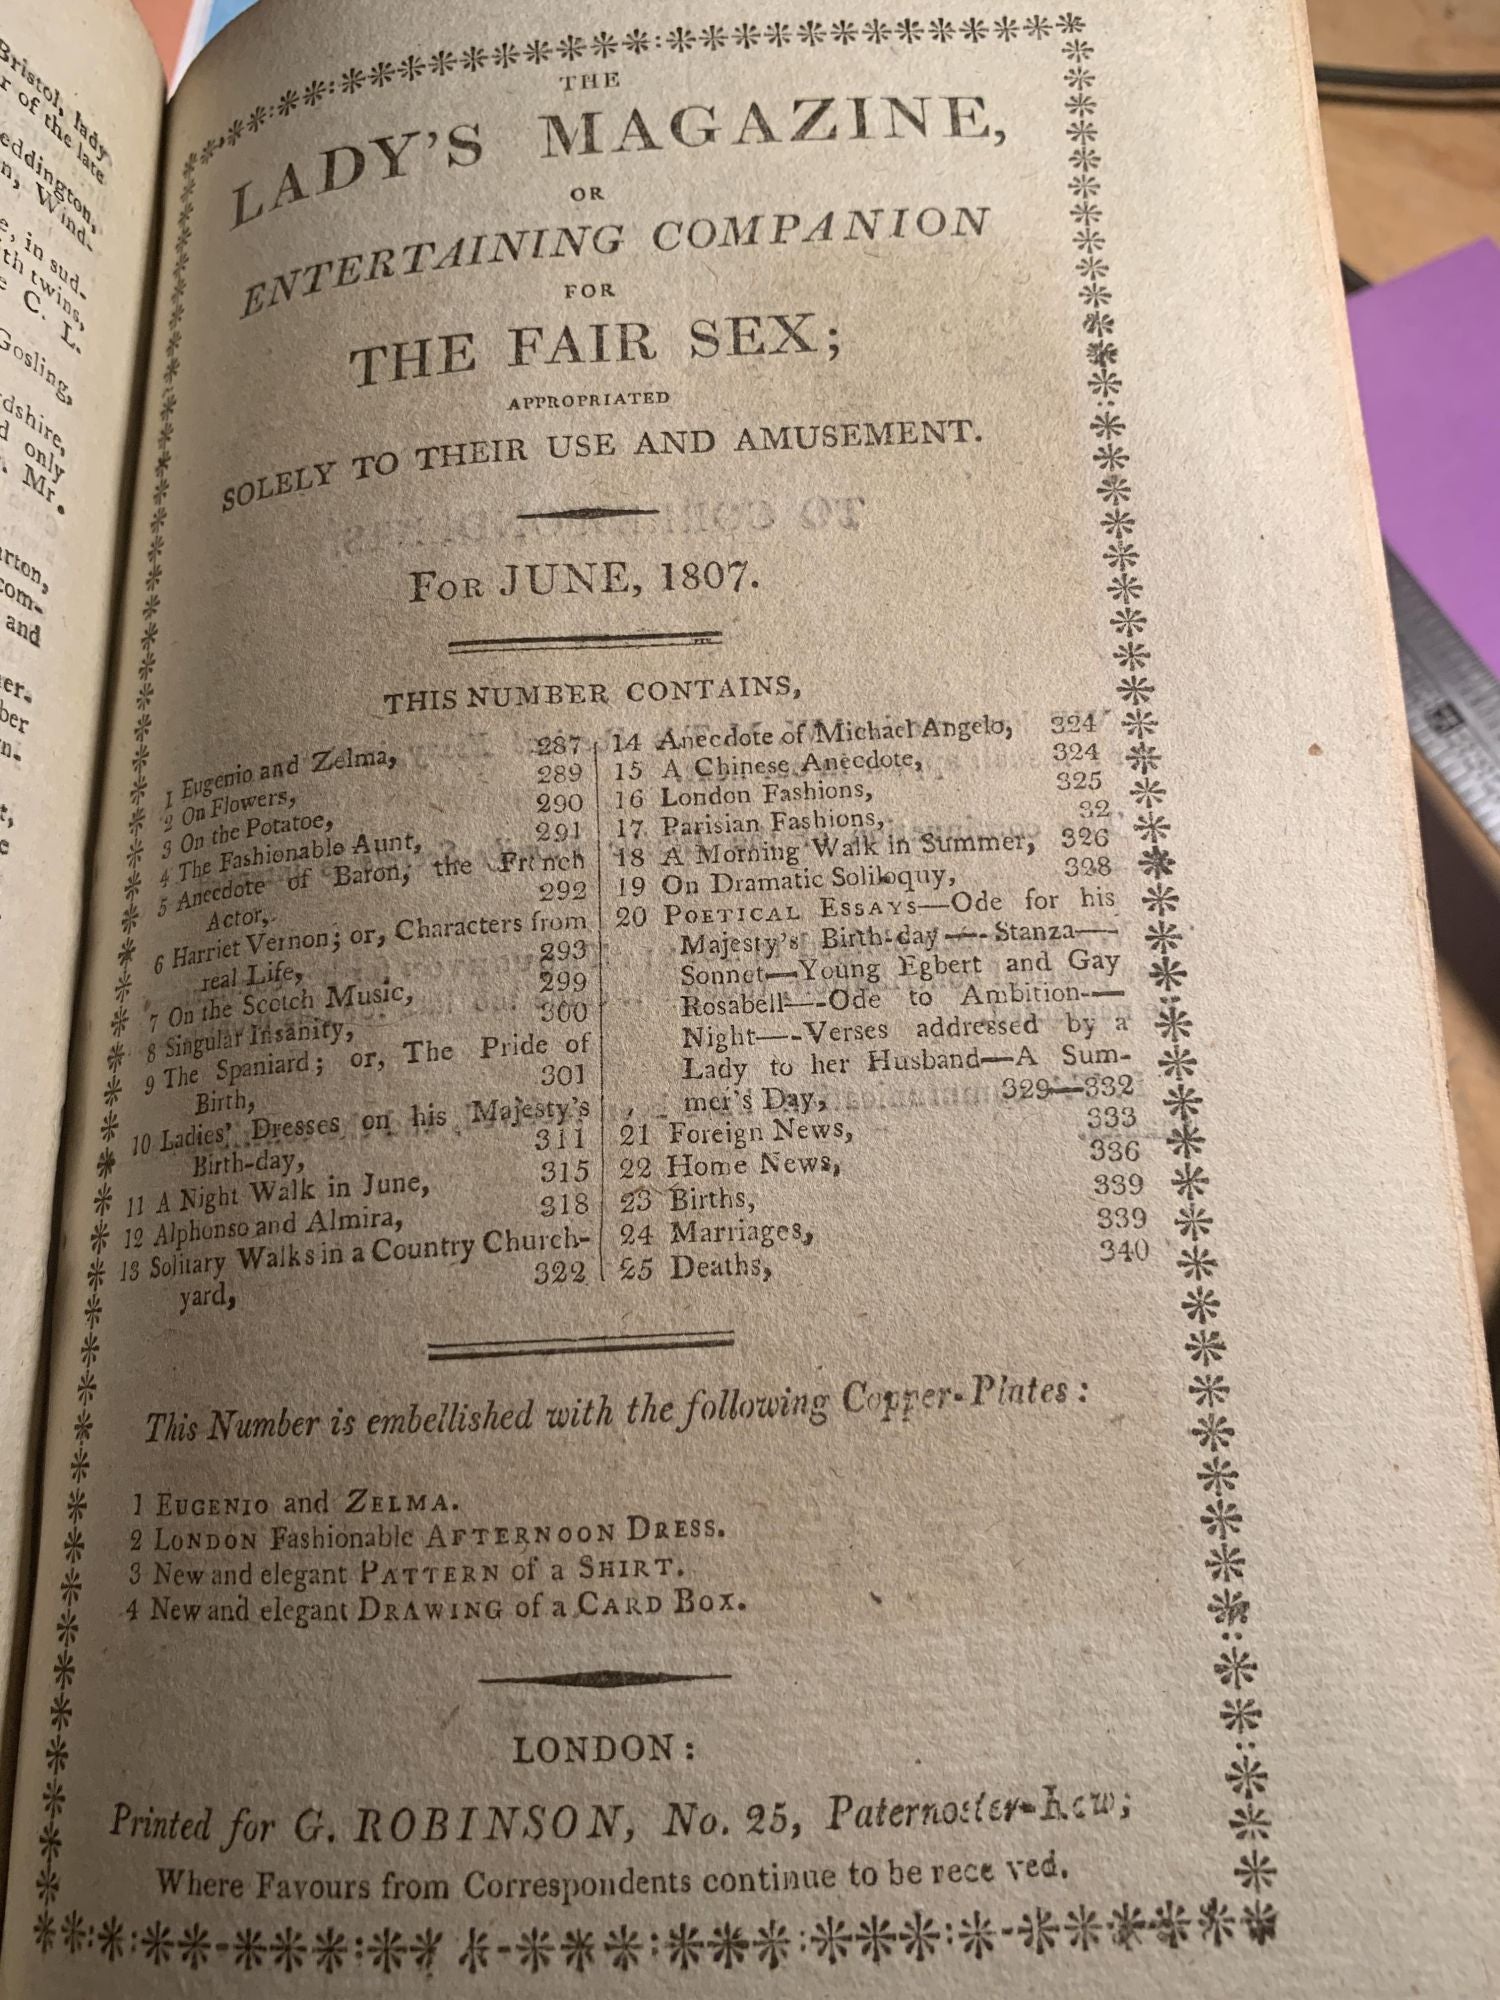 Various - The Lady's Magazine or Entertaining Companion for the Fair Sex, Appropriated Solely to Their Use and Amusement: Vol. XXXVIII for the Year 1807